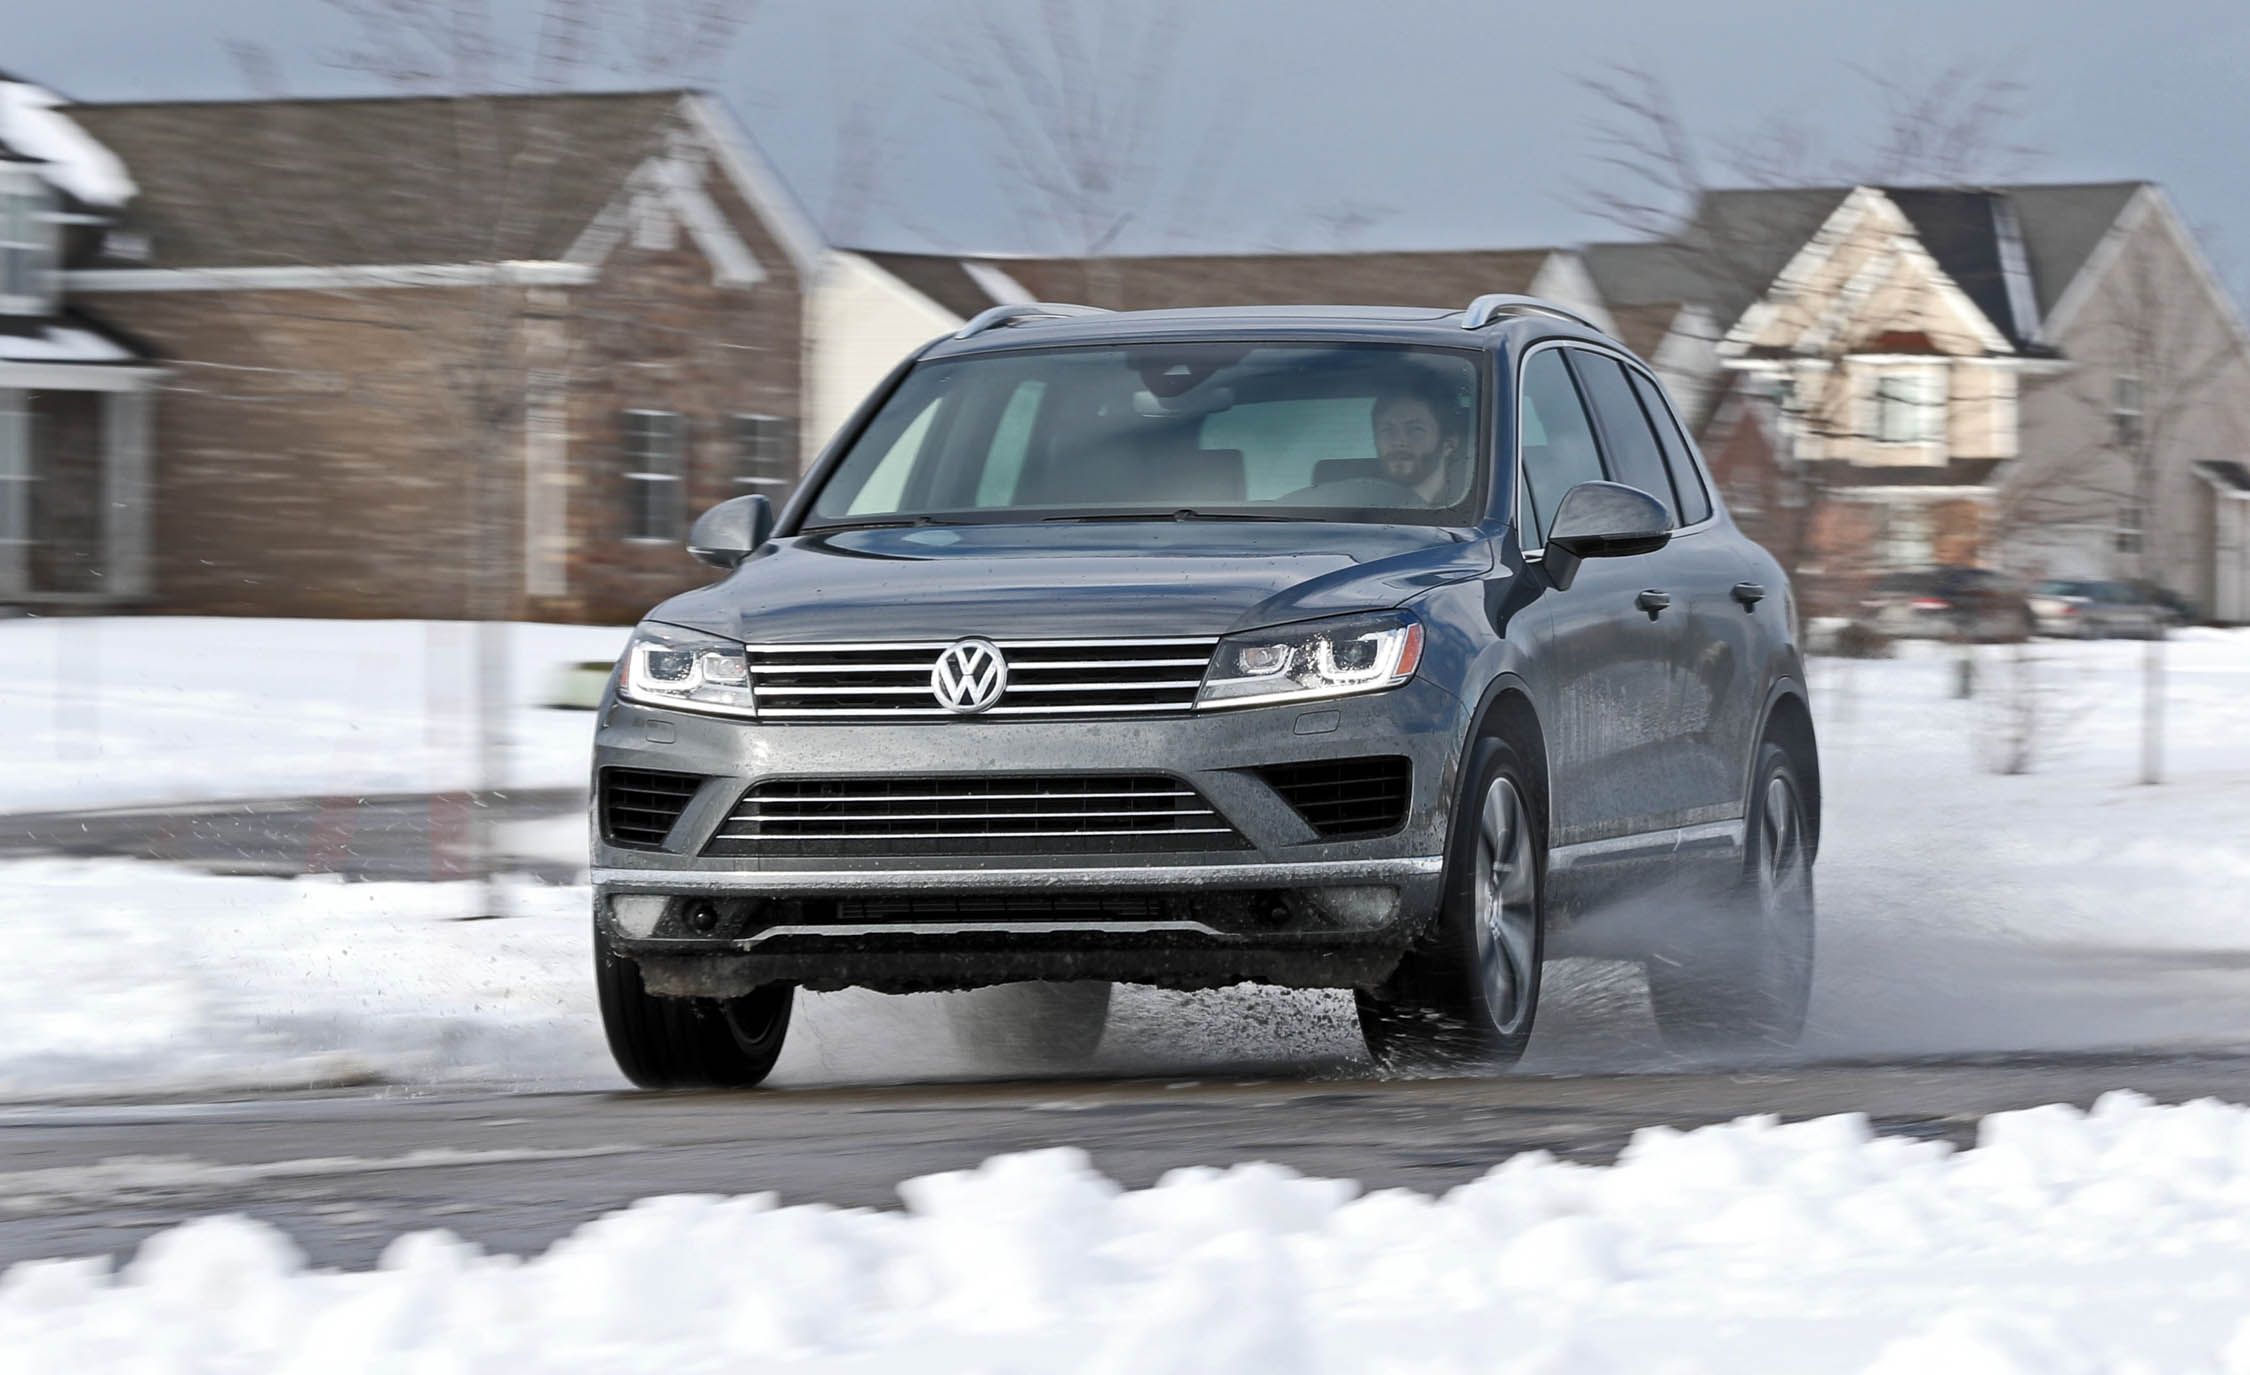 2017 Volkswagen Touareg Prices, Reviews, and Photos - MotorTrend